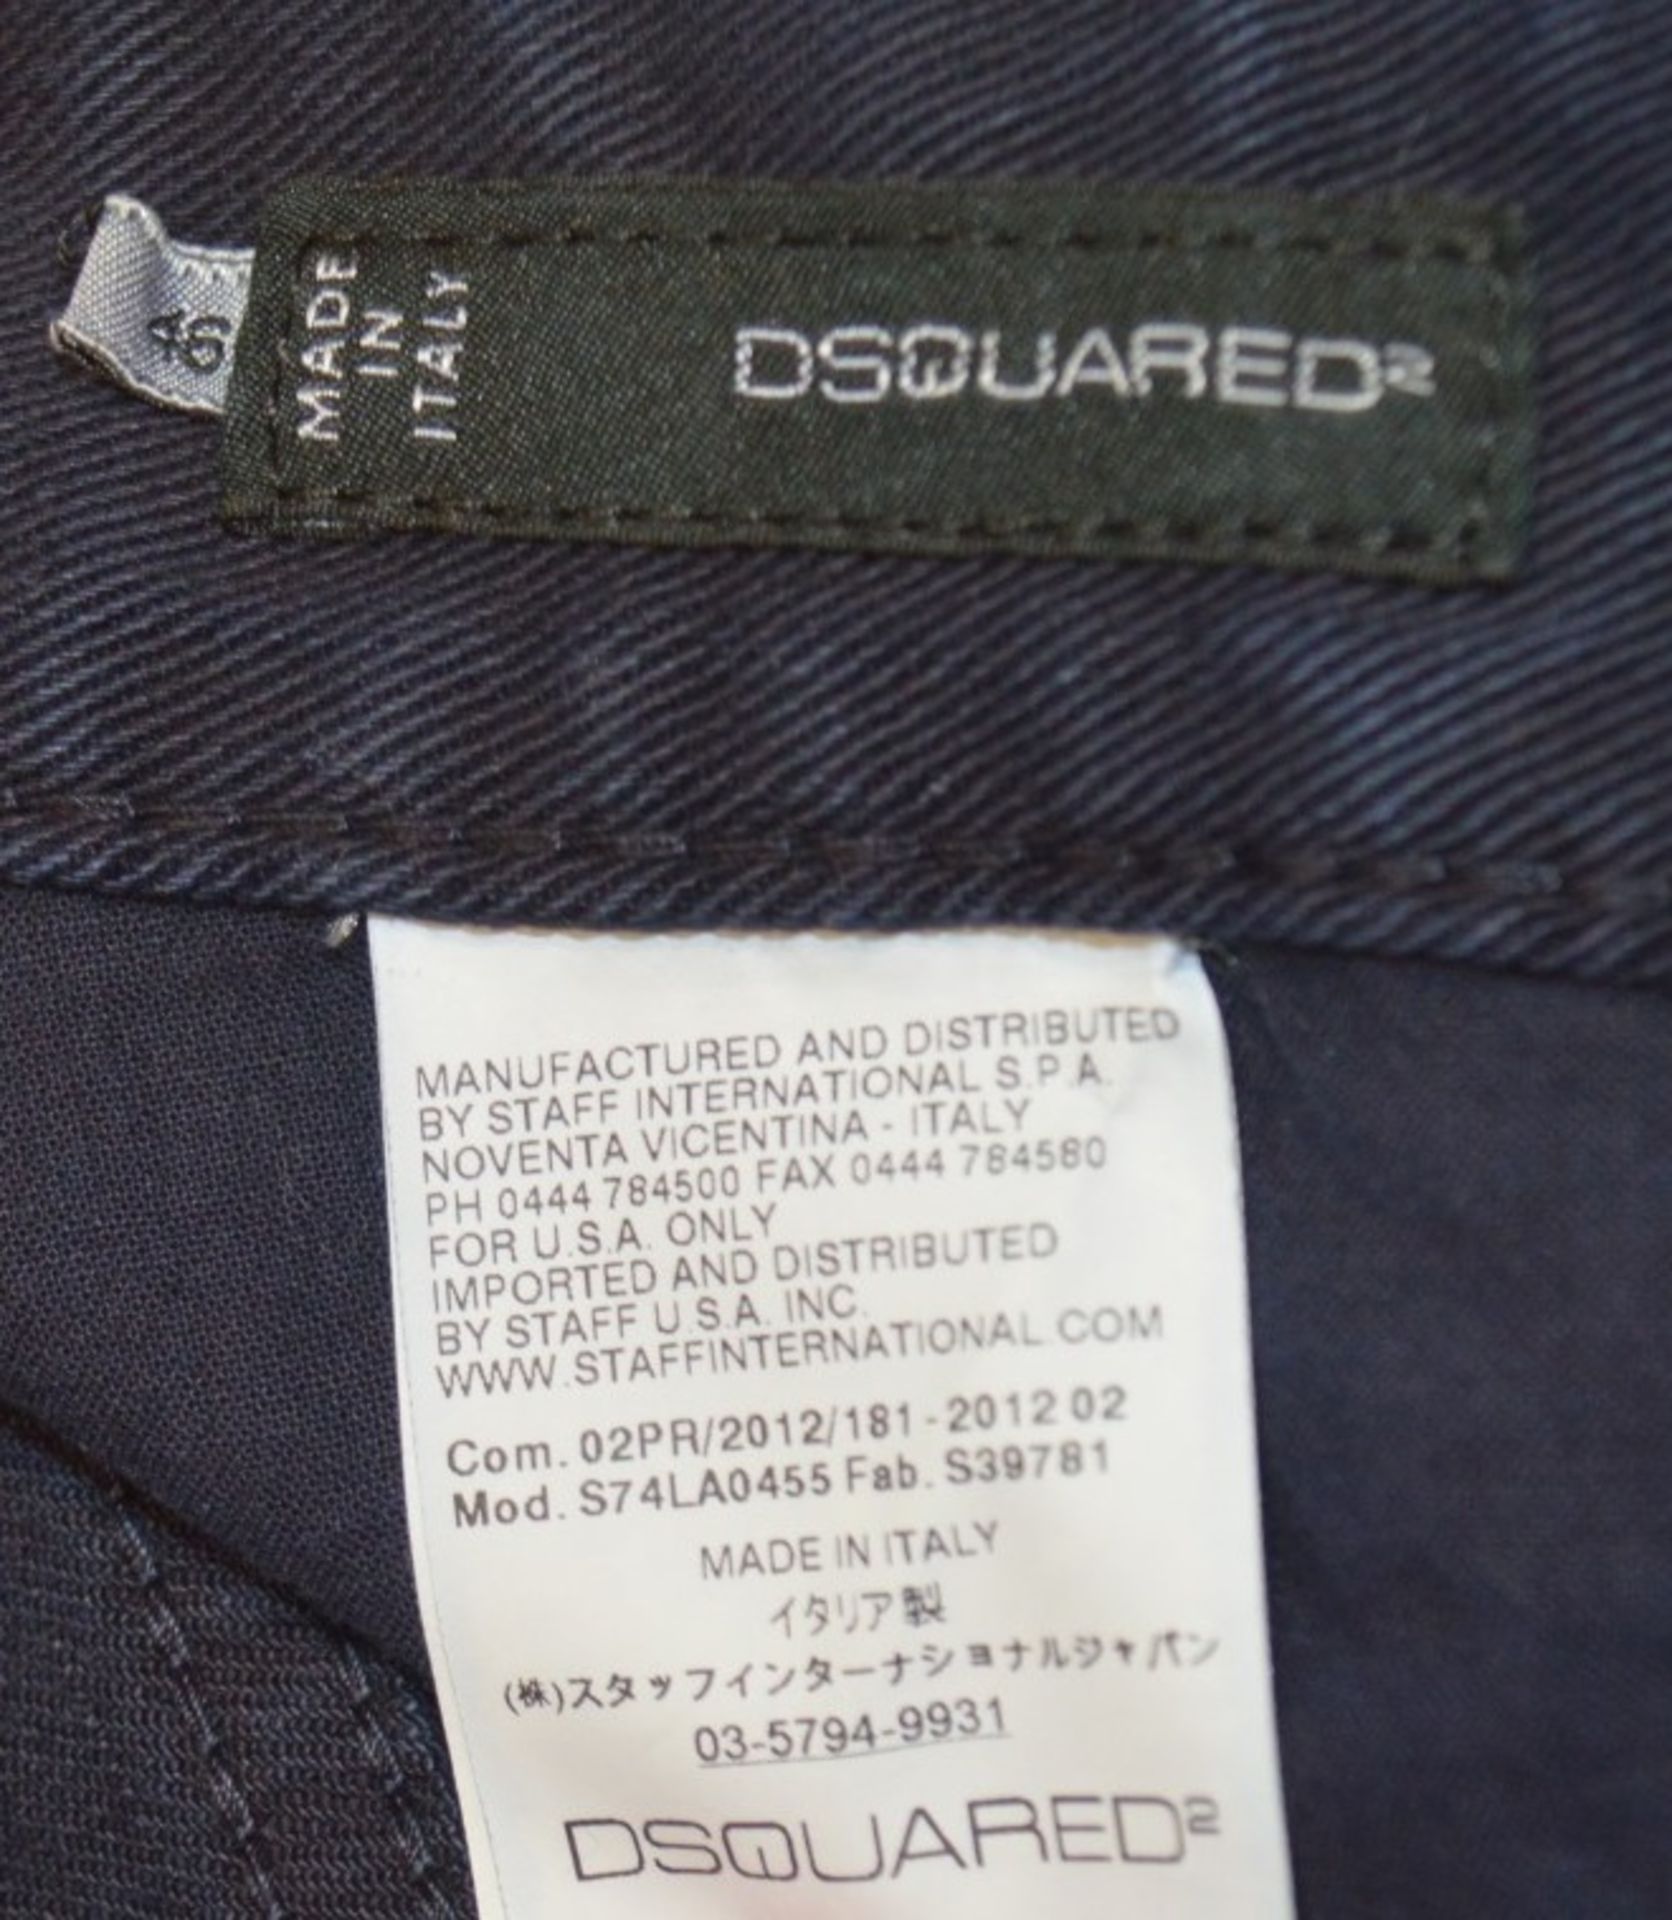 1 x Pair Of Men's Genuine Dsquared2 Designer Jeans In Navy - Waist Size: UK 30 / ITALY 46 - Preowned - Image 7 of 7